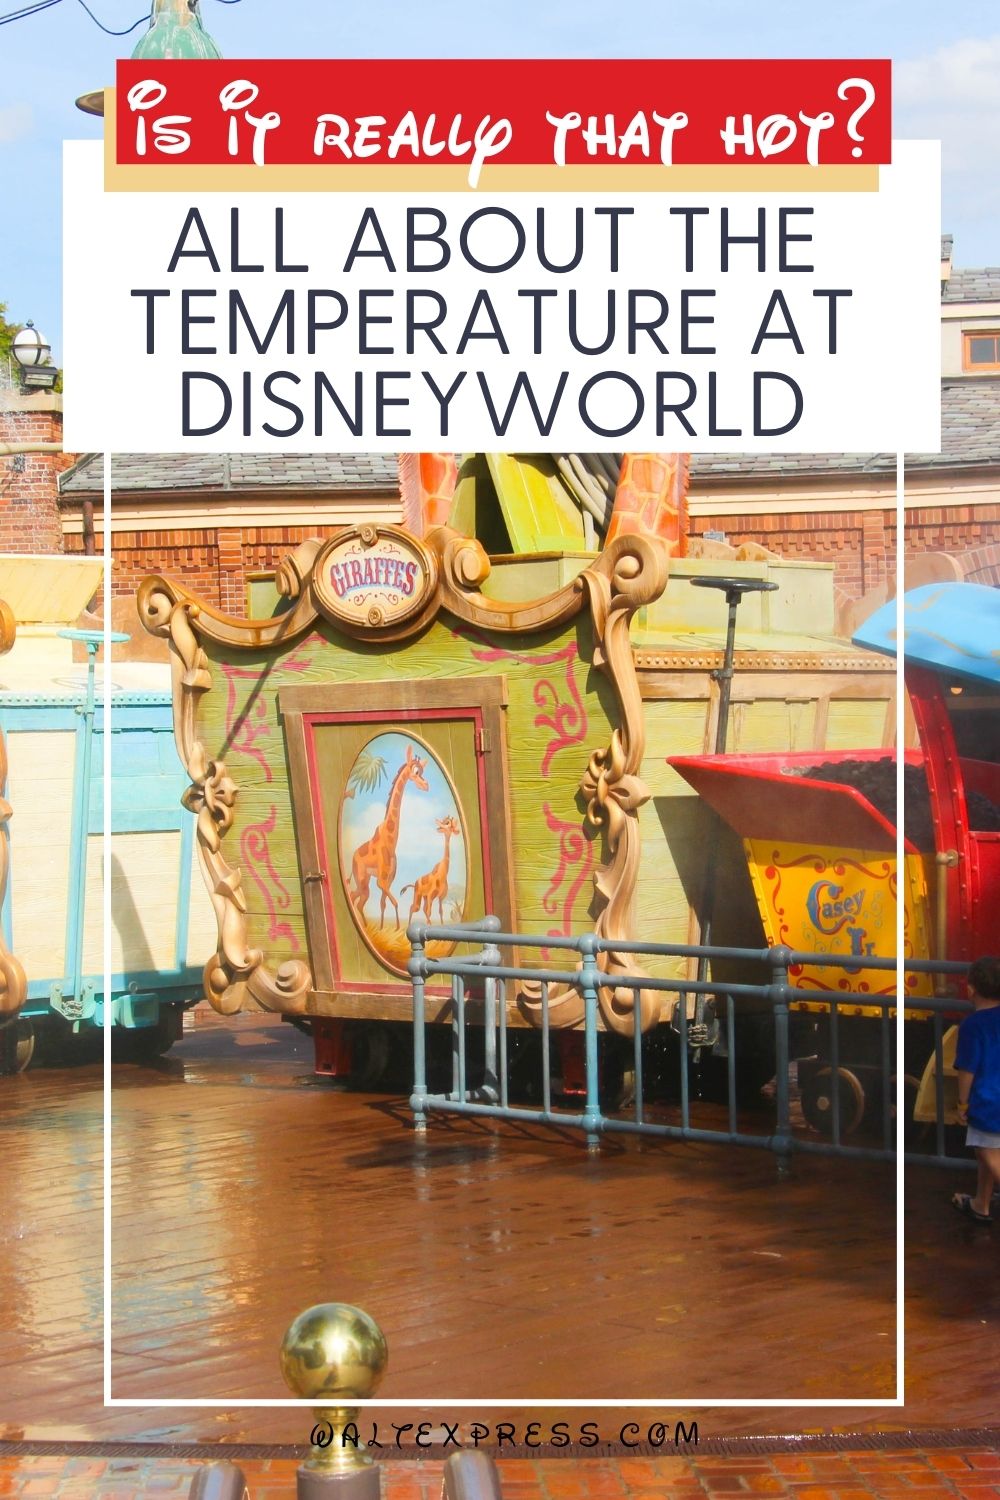 Is It Really THAT Hot? All About The Temperature At Disney World